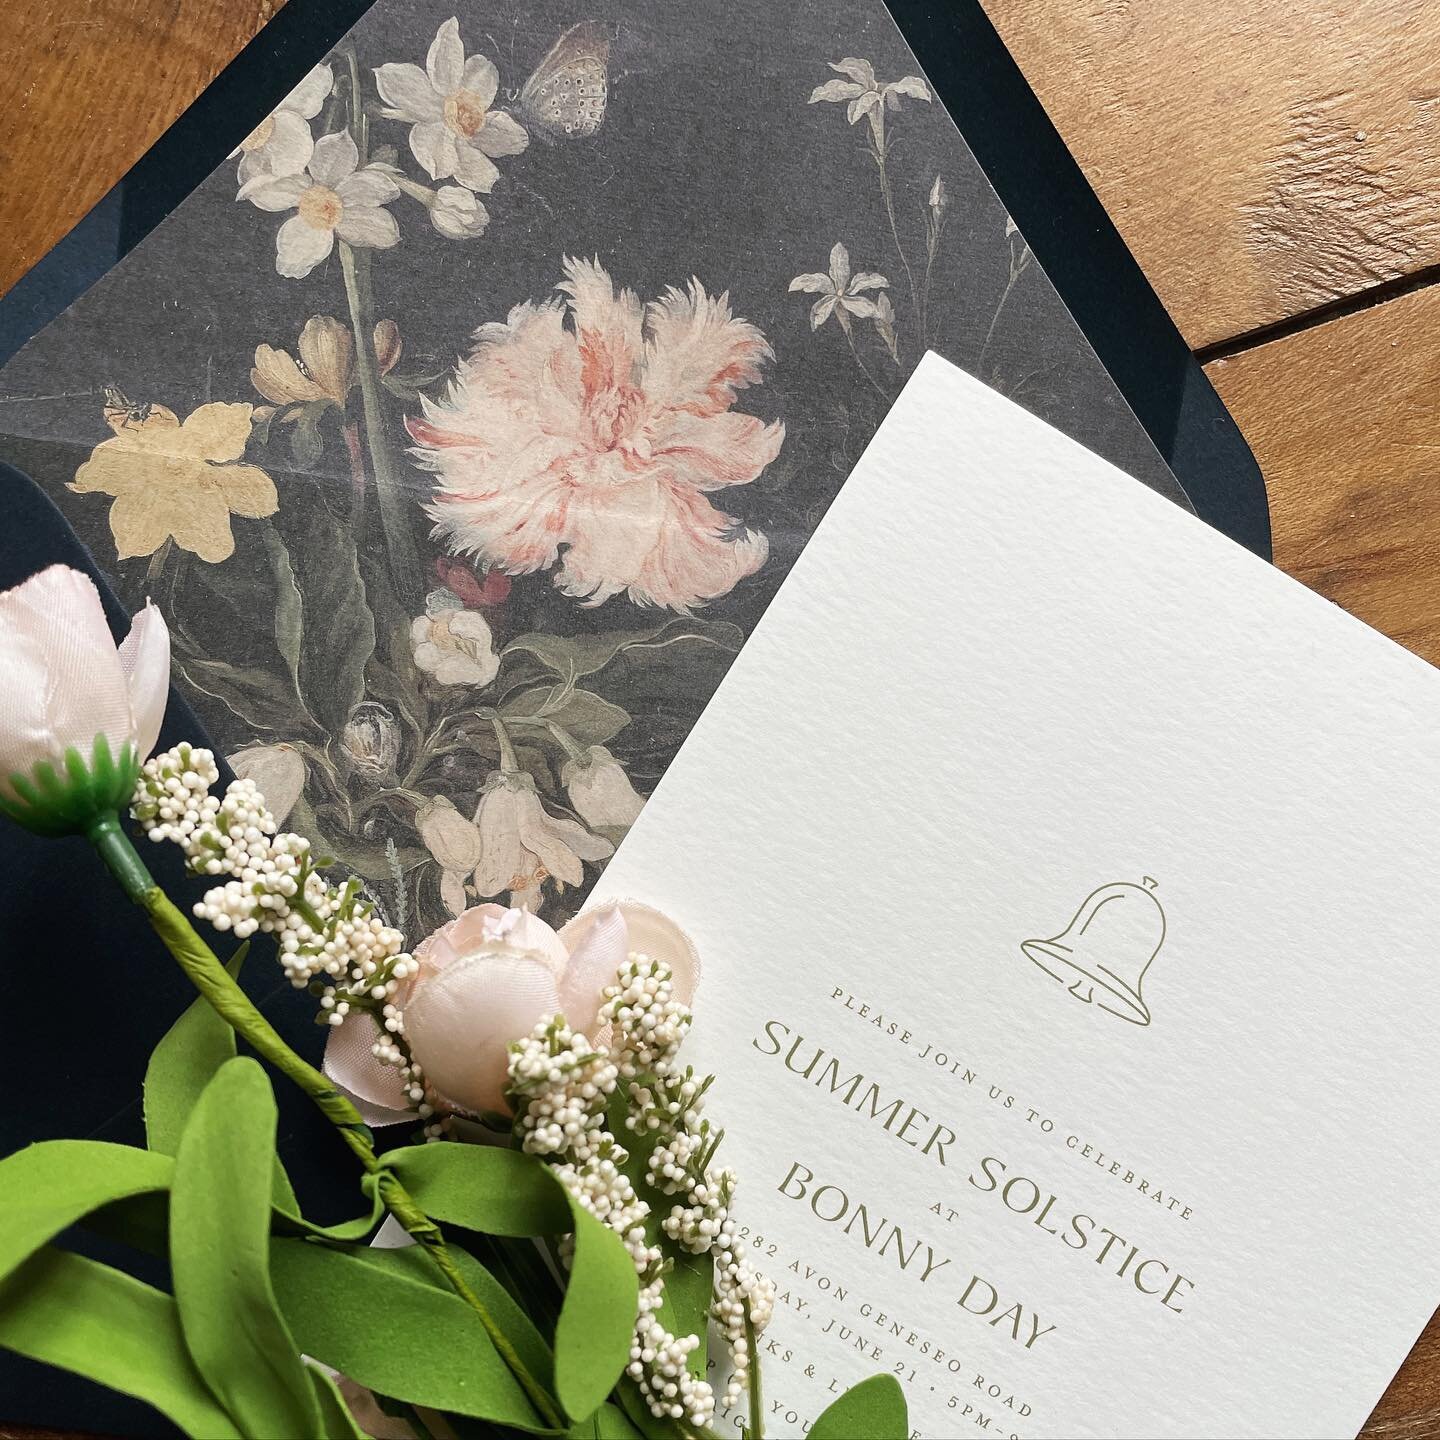 Happy Solstice! ☀️ (A little late)
 
We recently designed these solstice invitations for a flower farm, and the vintage floral liner was the perfect finishing touch!